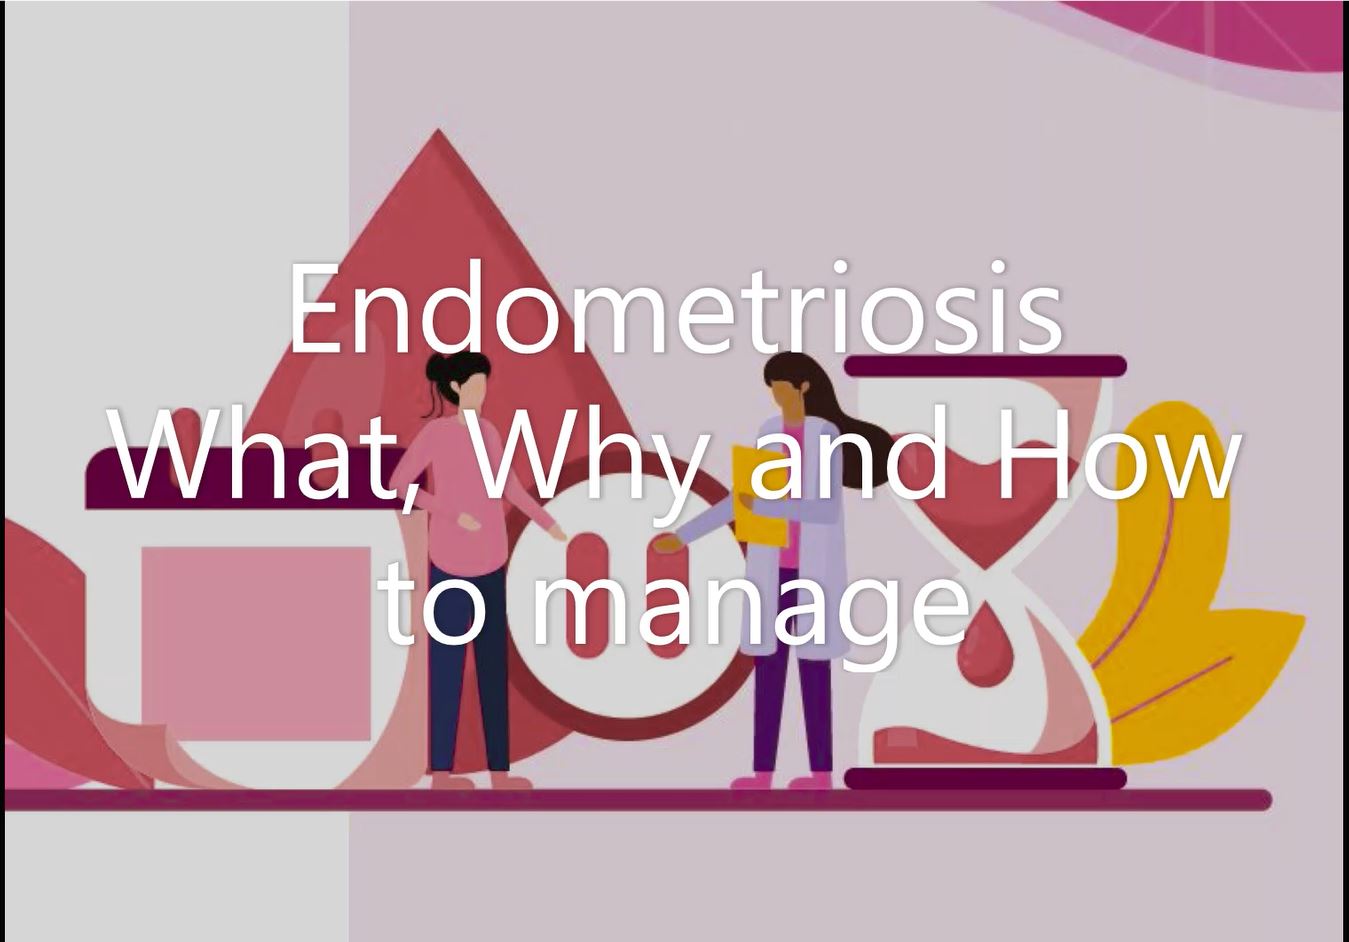 Endometriosis: What, Why And How To Manage.